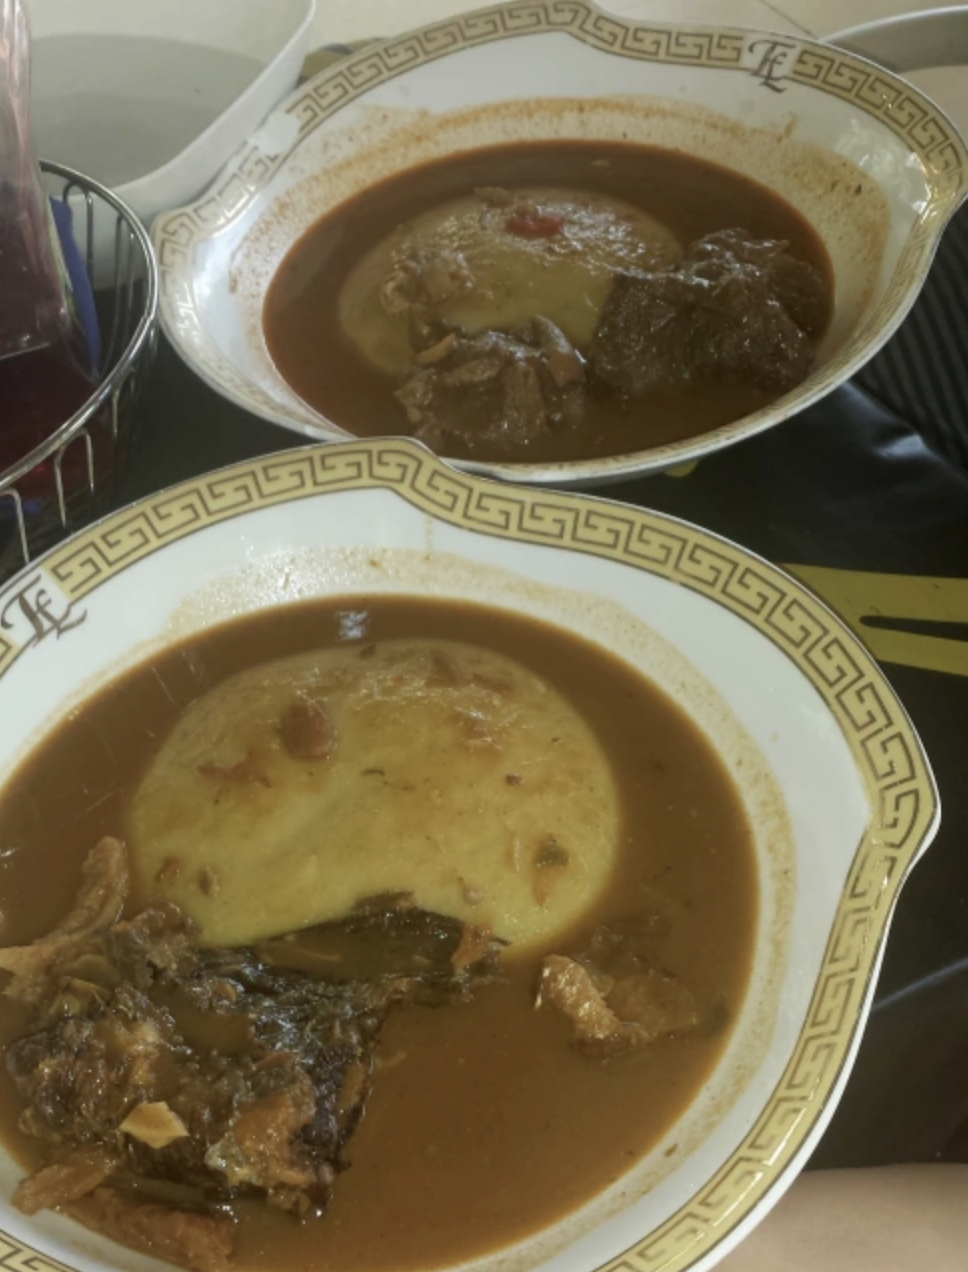  Fufu (pounded cassava plant) served in light soup with grilled fish and cow meat 